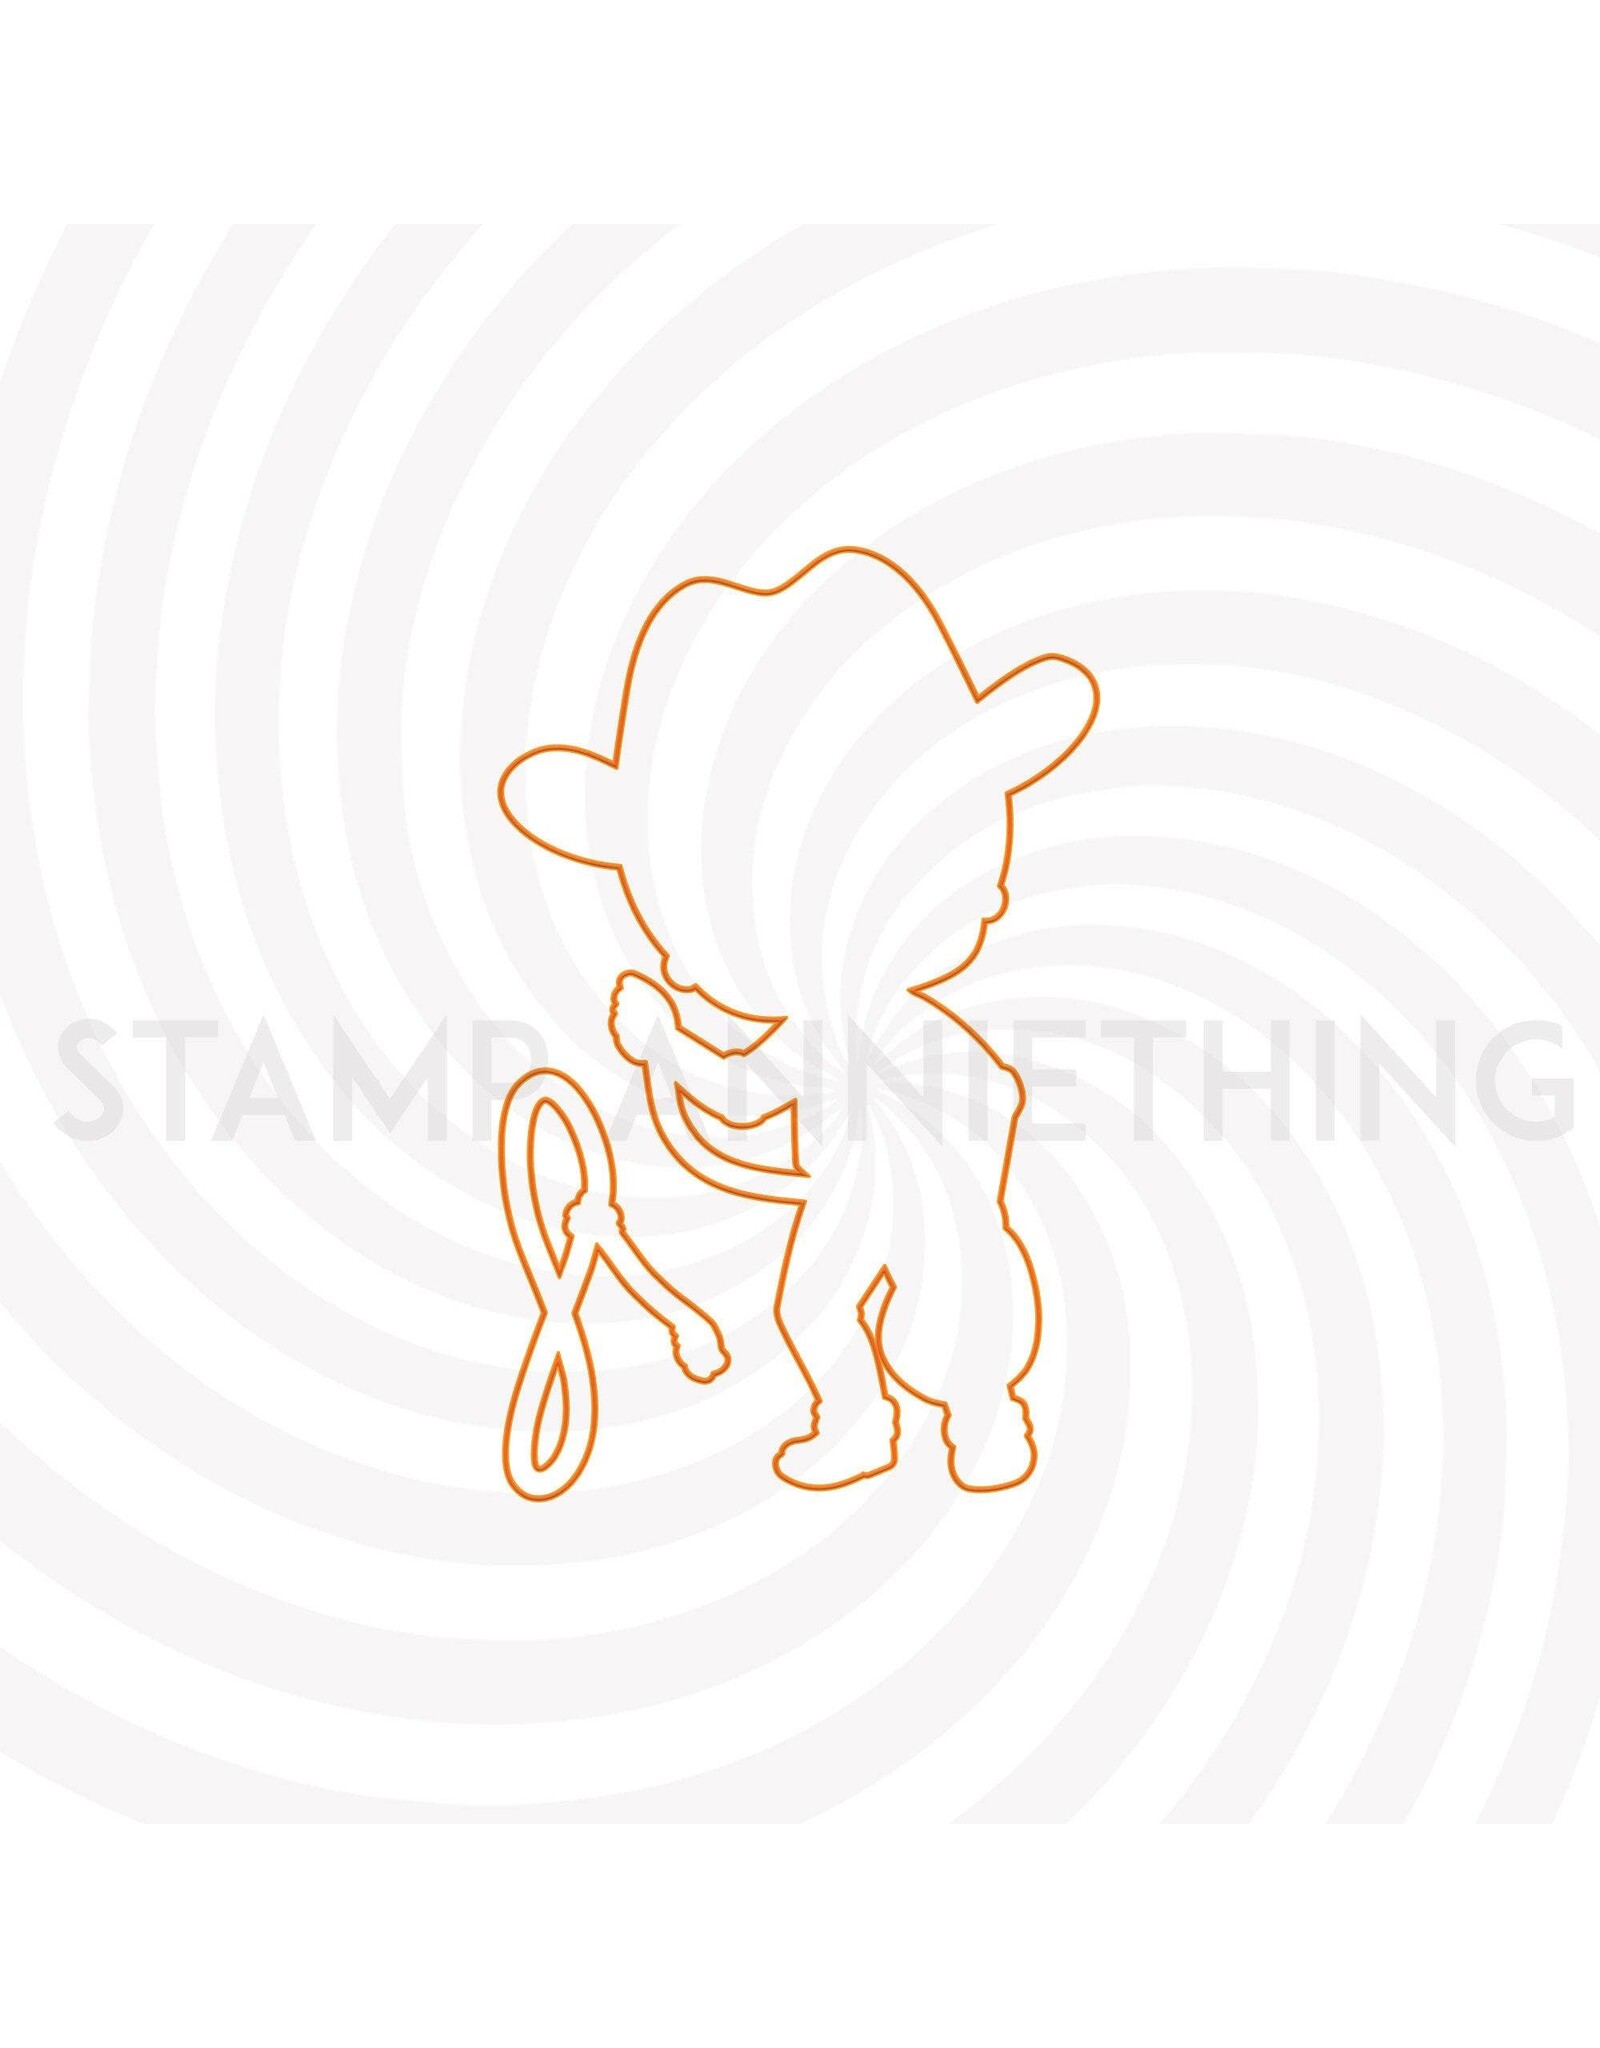 Stamp Anniething Nick - You Lasso's my Heart Outline Die